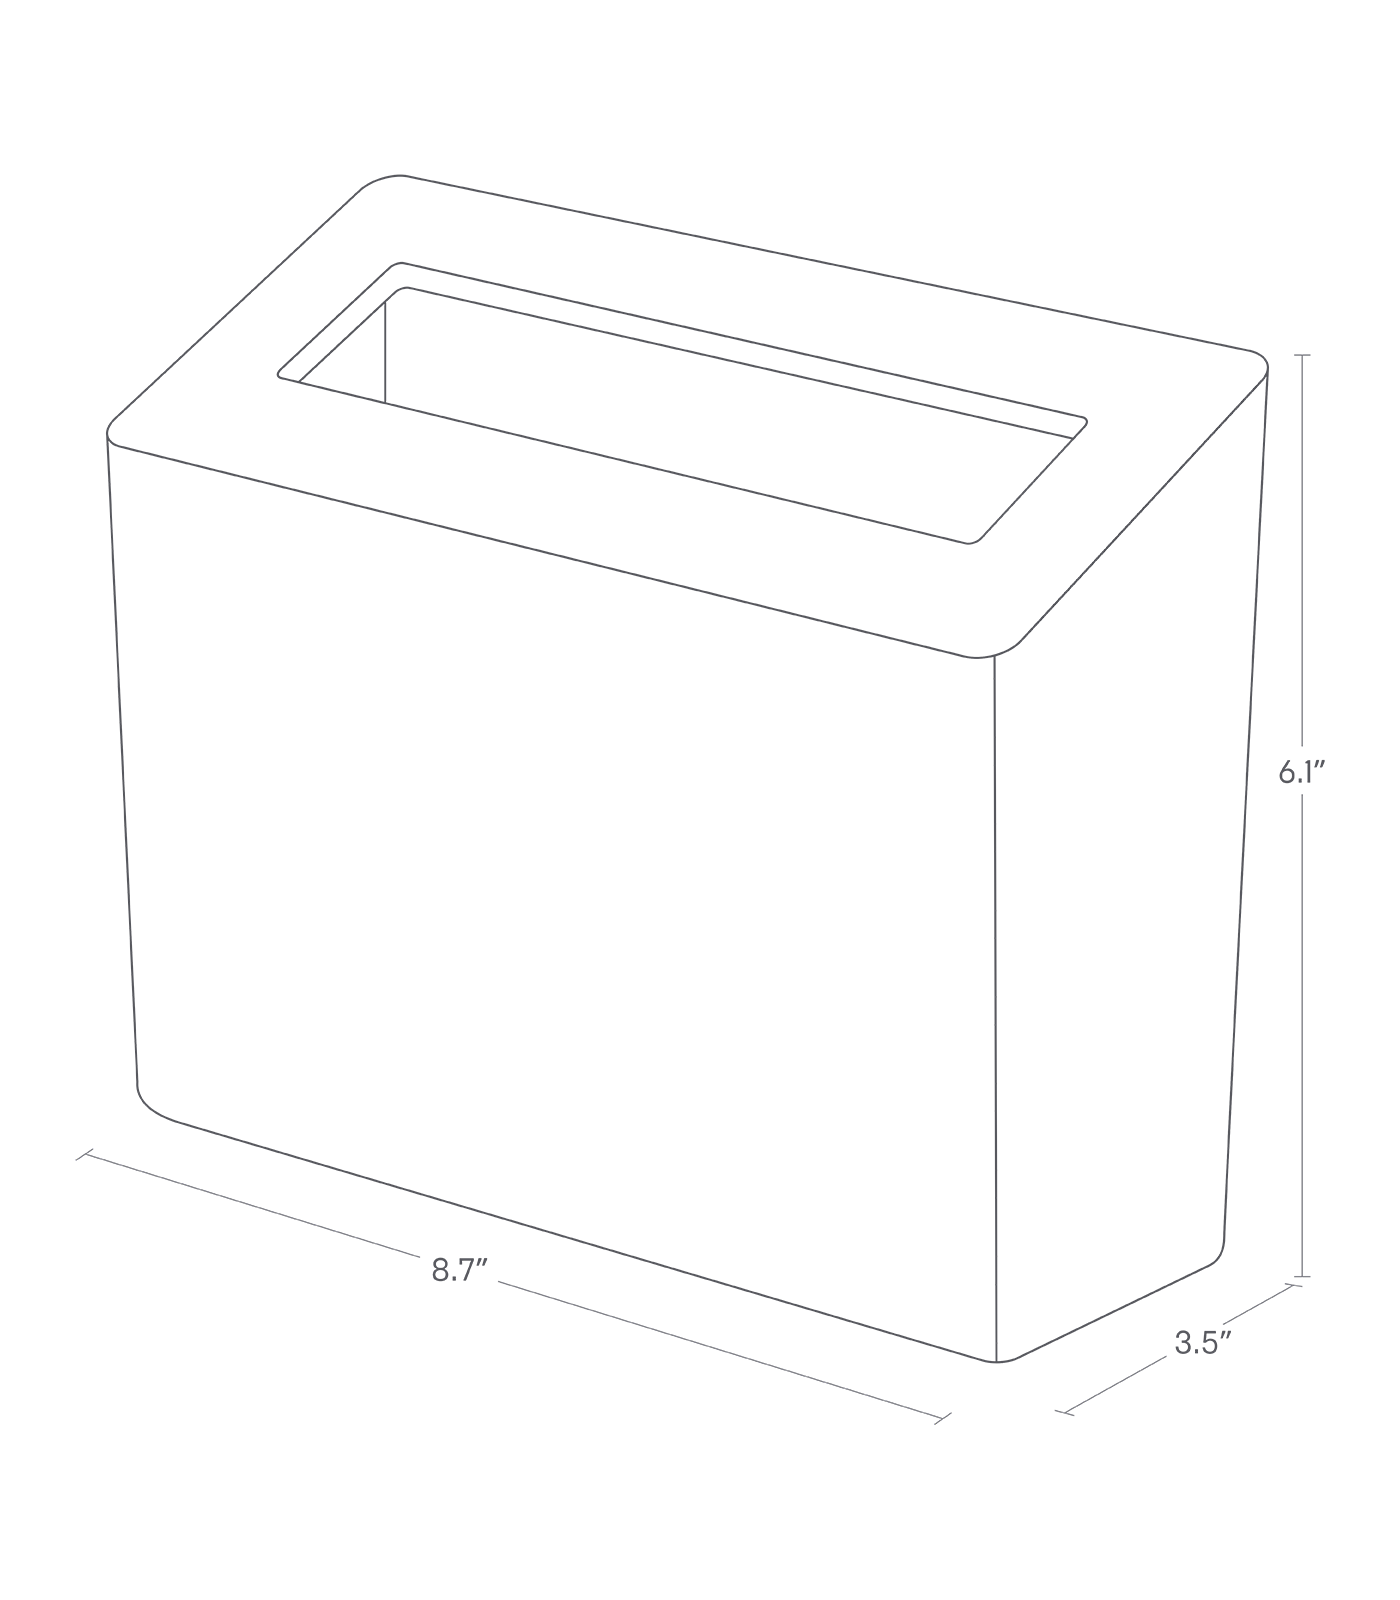 Dimension Image for Countertop Waste Bin on a white background showing a height of 6.1